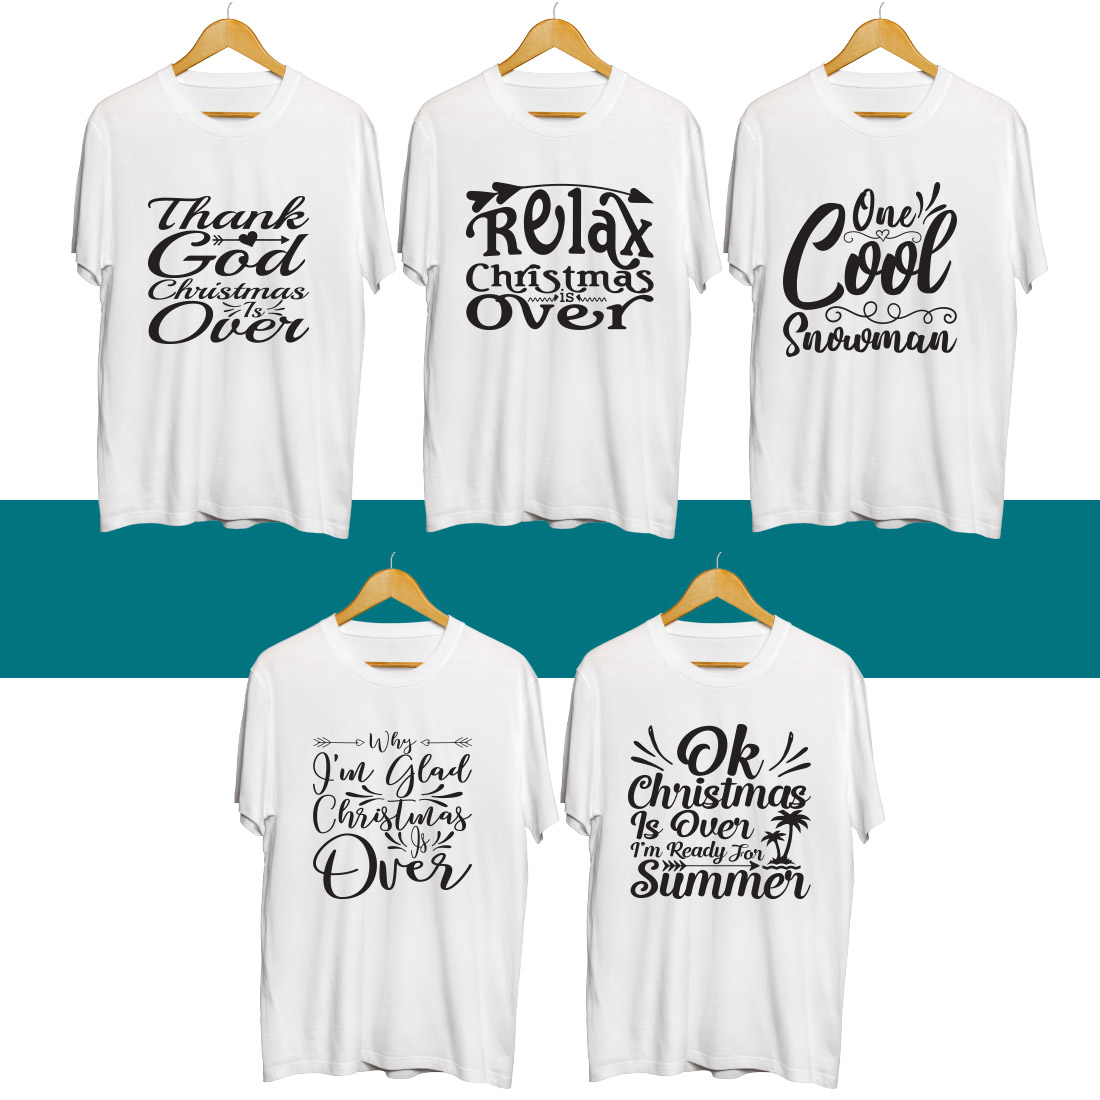 Four t - shirts with different sayings on them.